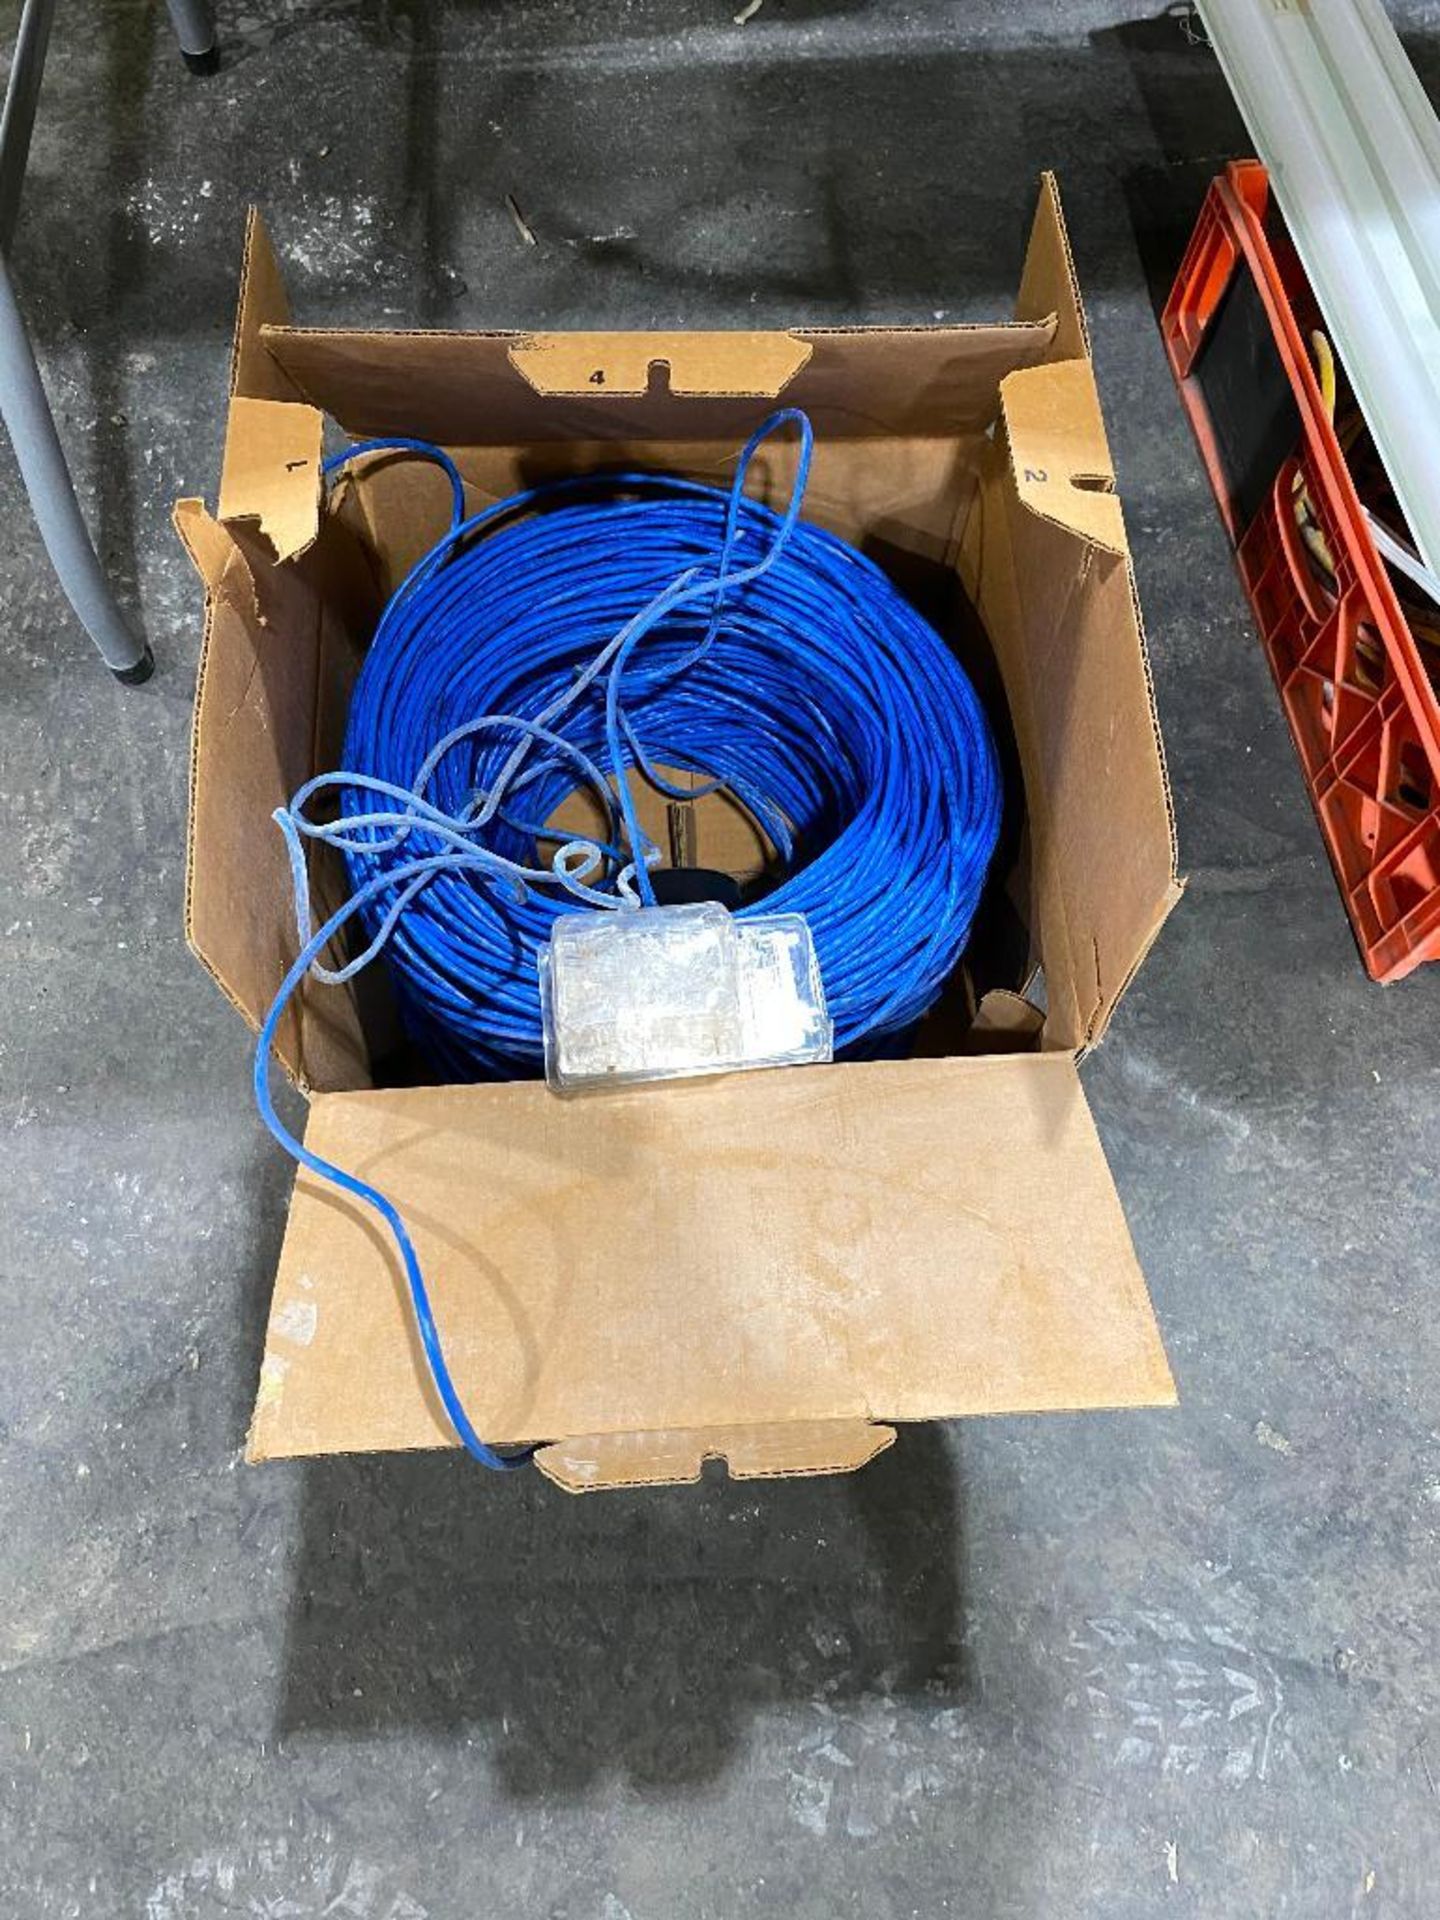 Spool of Asst. Cat5e Cable and Cat5e Cord Ends - Image 2 of 3